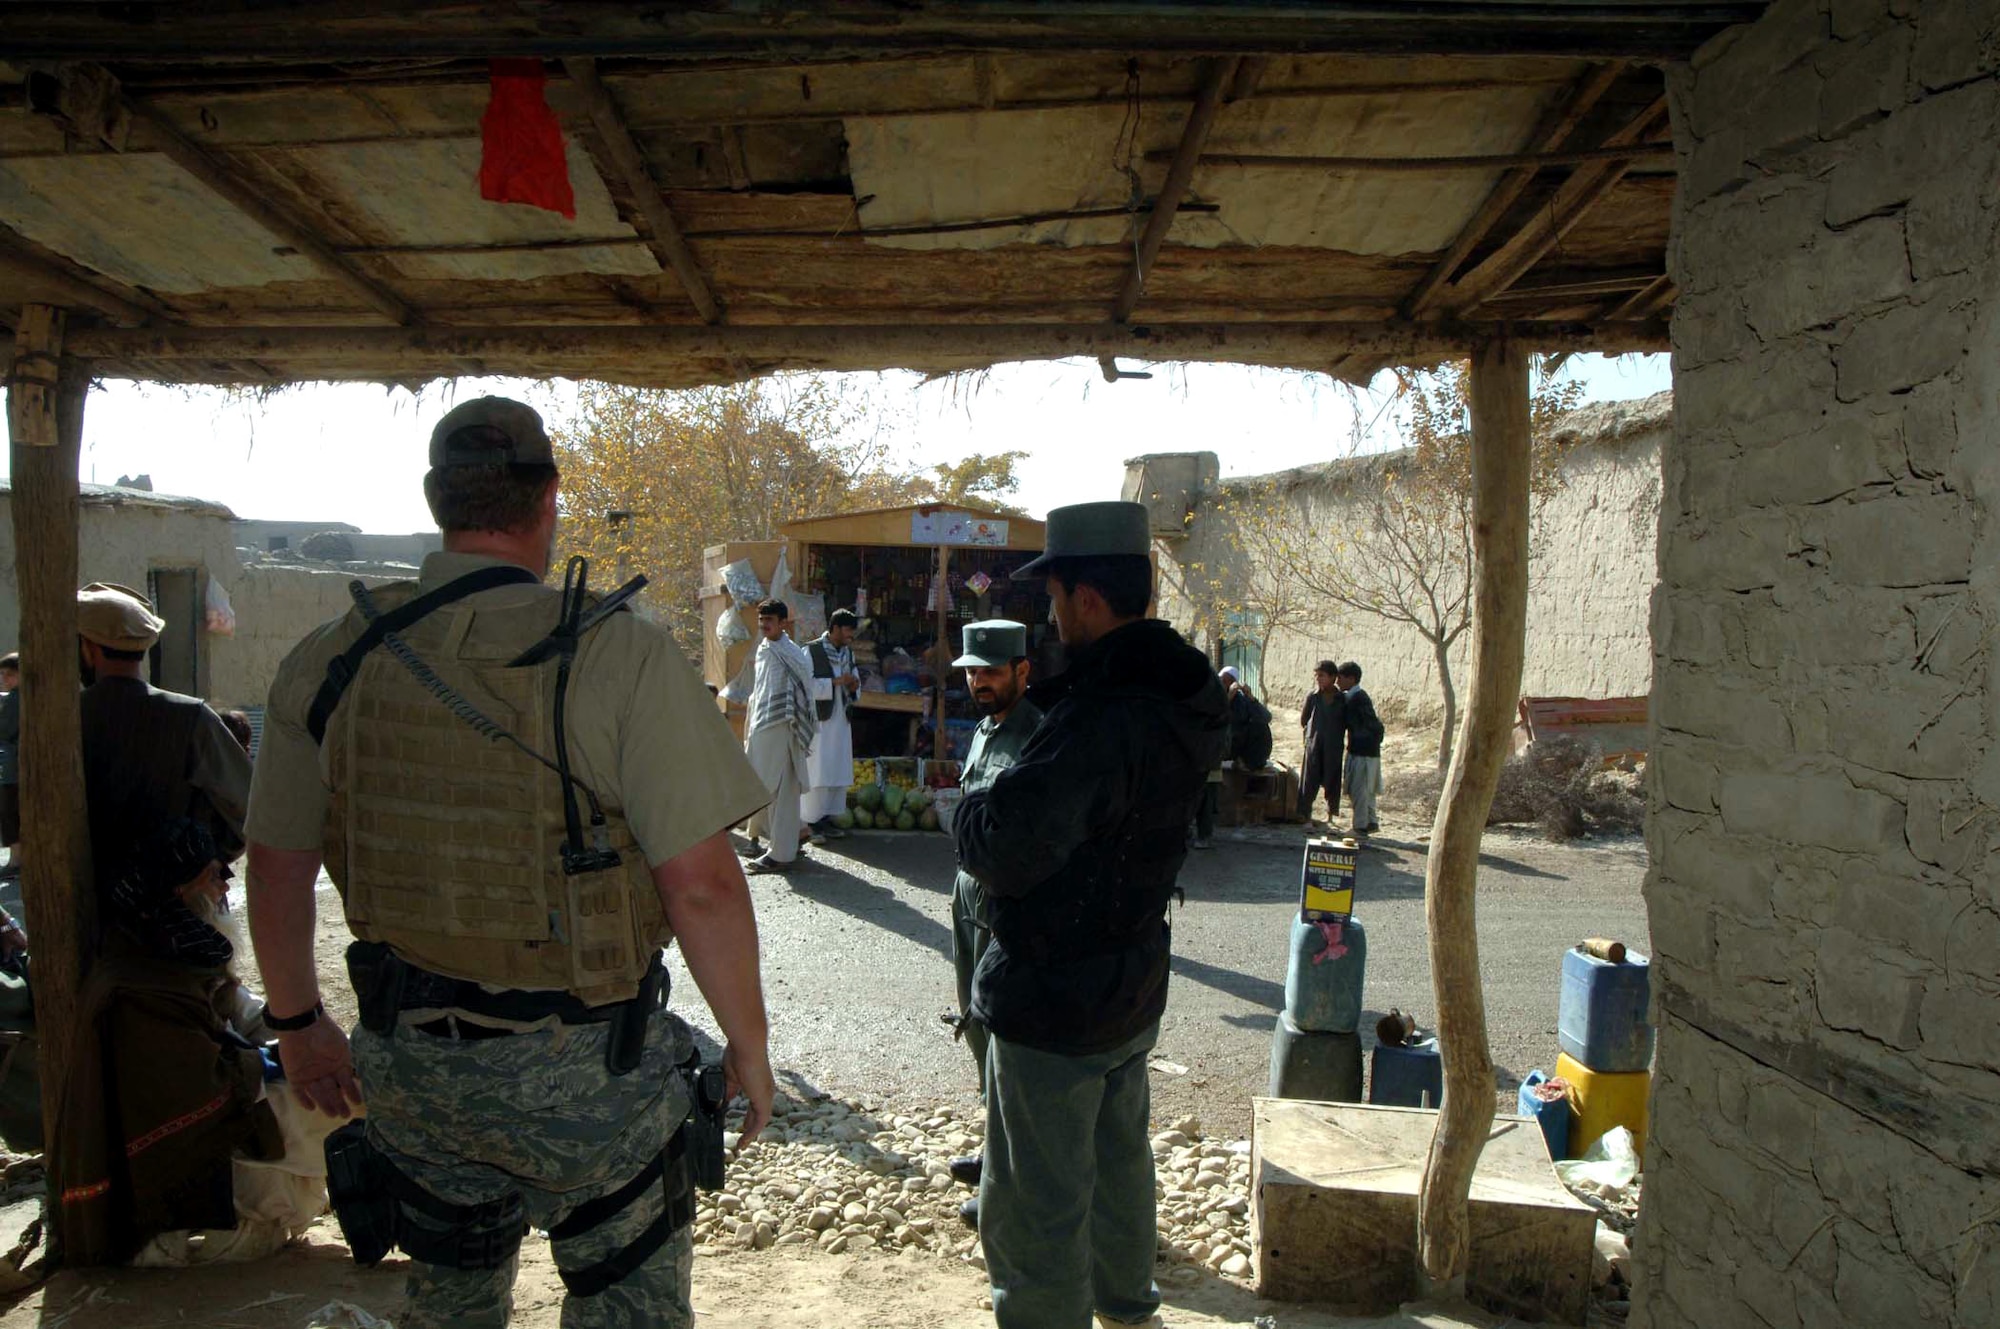 Afghan National Police members help provide security during a recent medical civil action project. The ANP is an essential partner in efforts to provide improved services and infrastructure to the country of Afghanistan. (U.S. Air Force photo/Staff Sgt. Mike Andriacco)